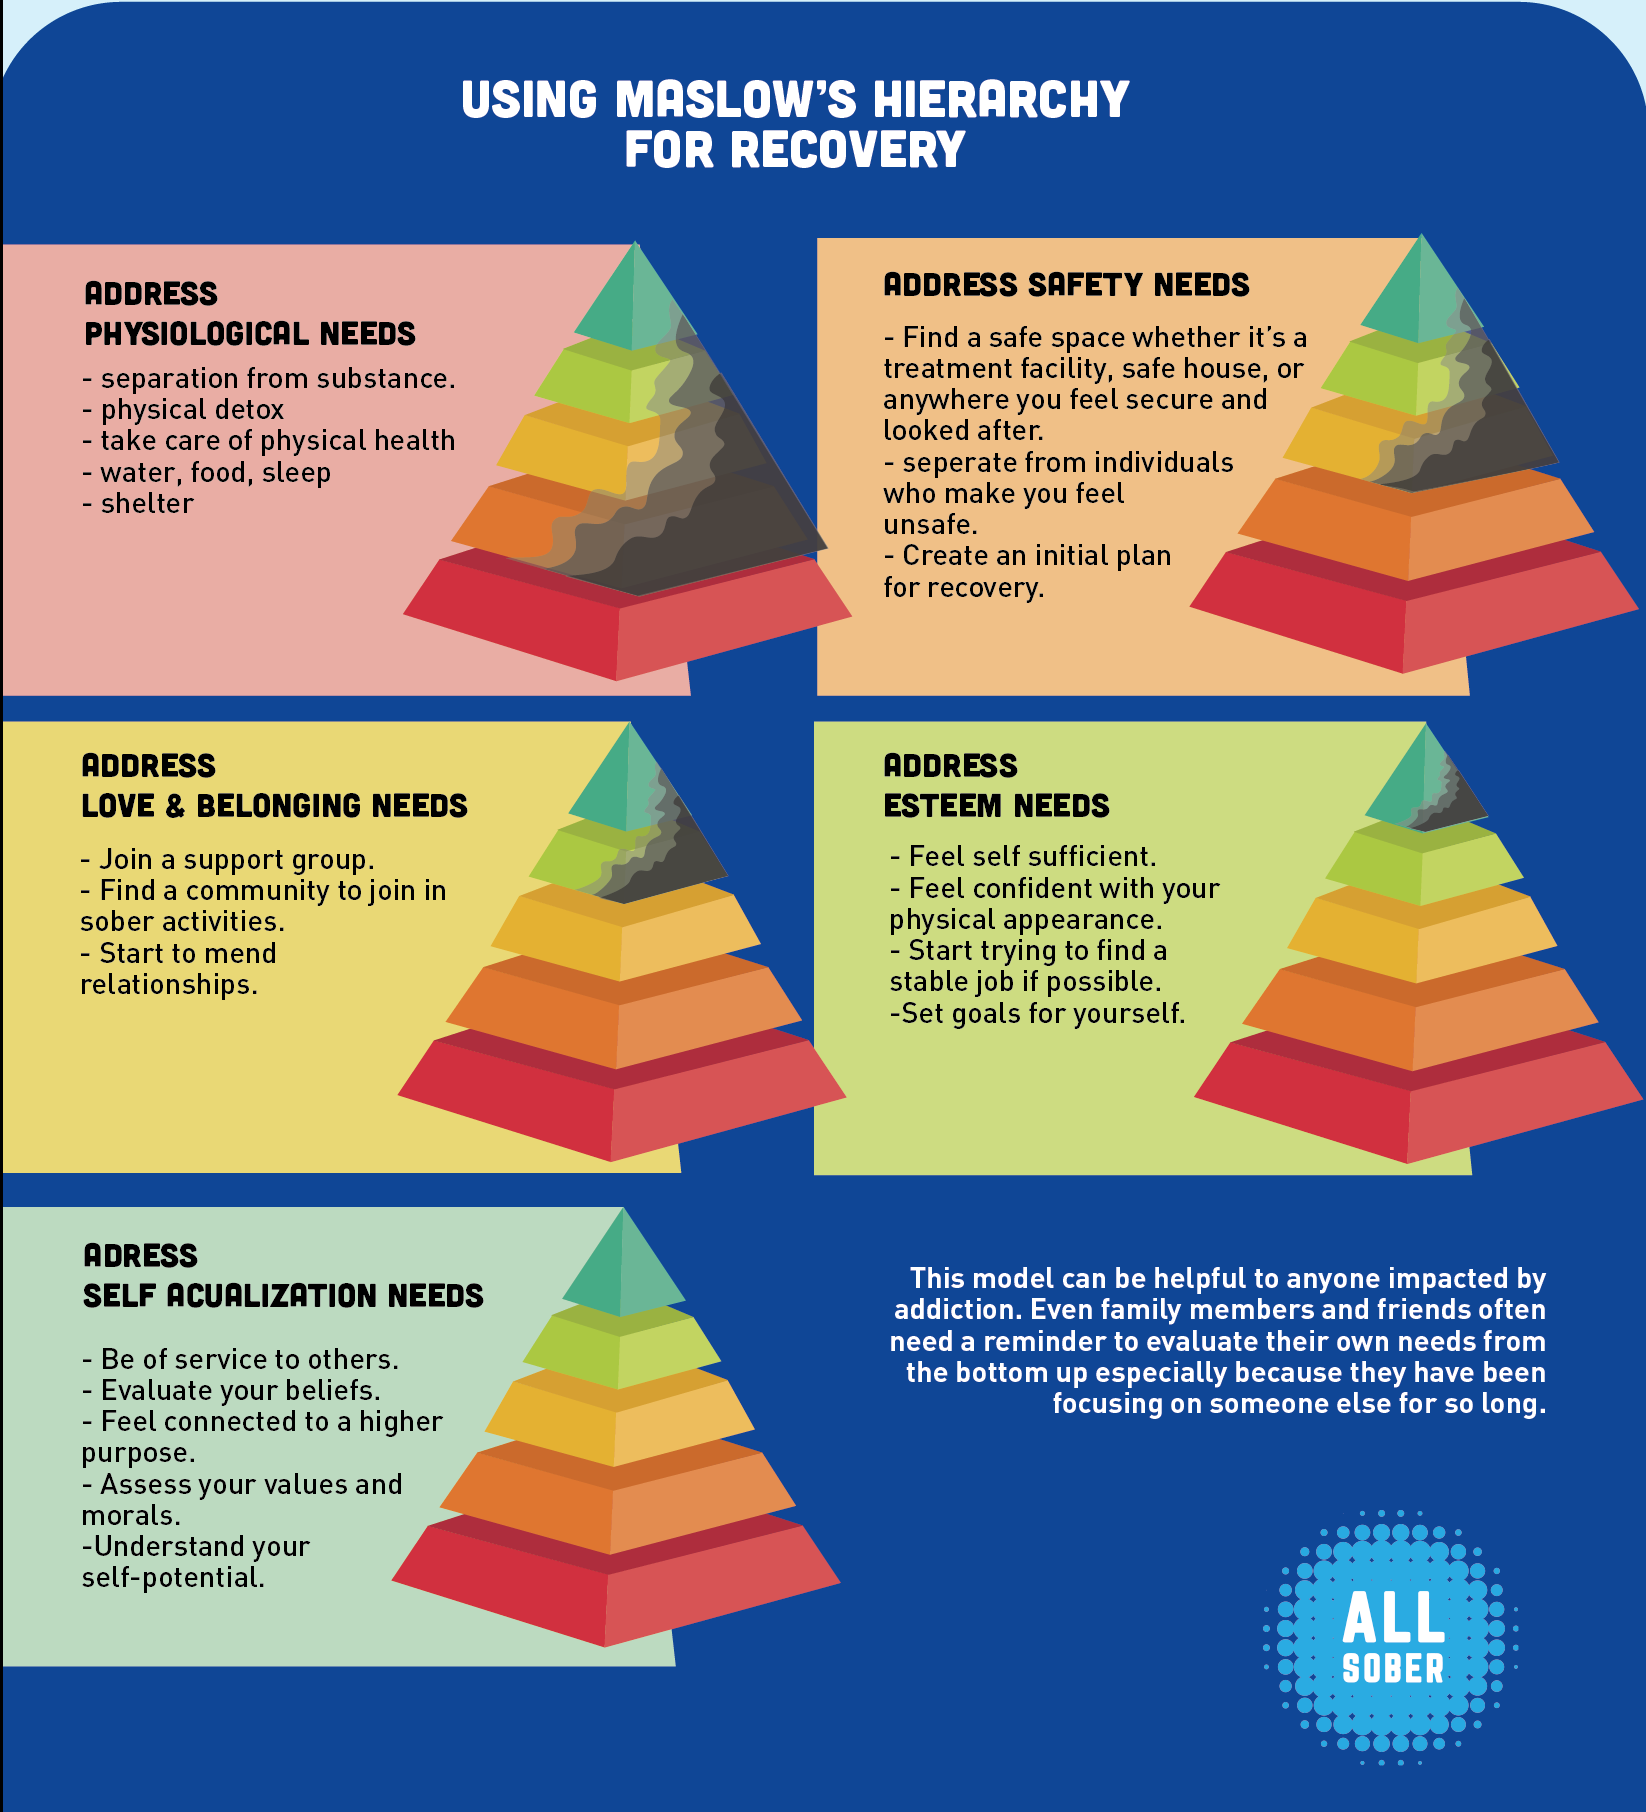 Maslow's Hierarchy of Needs pyramid in addiction recovery